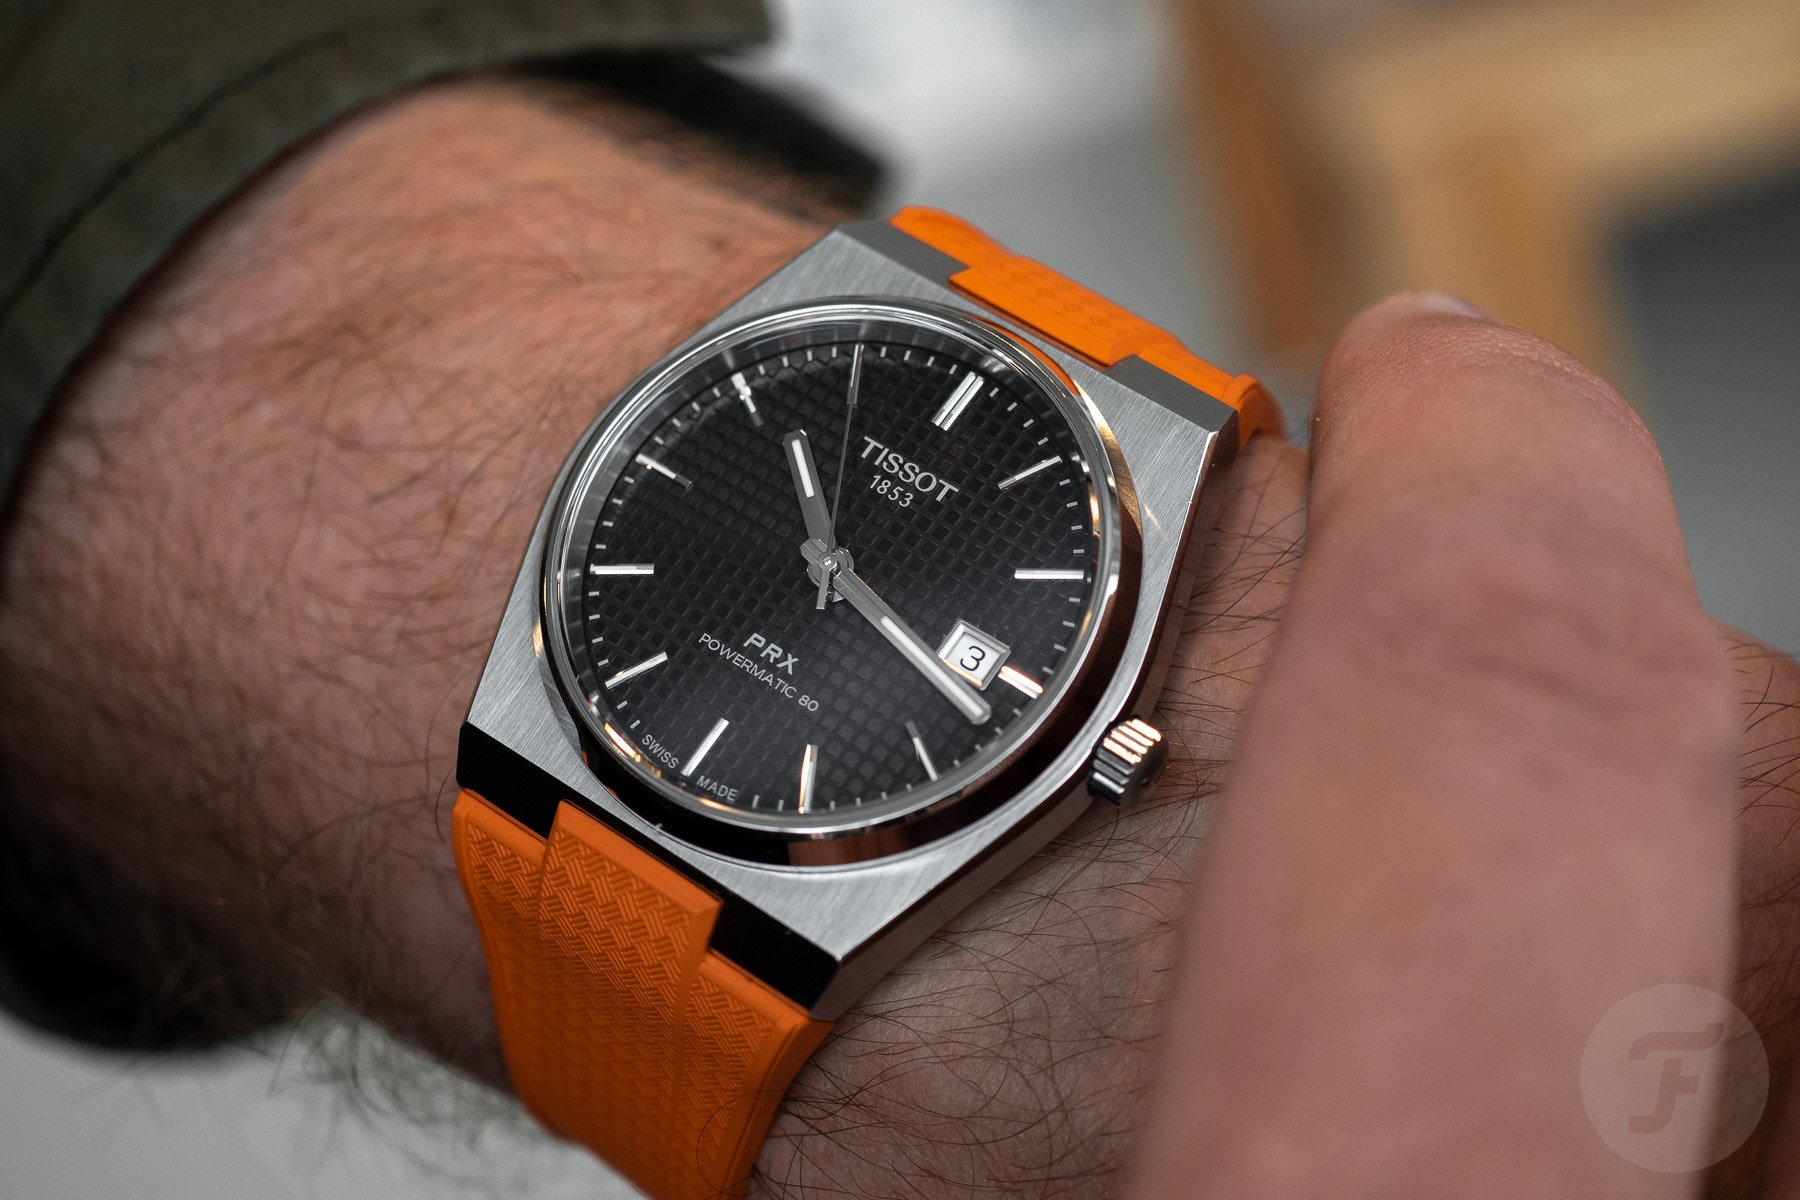 Hands-On With The Official Rubber Straps For The Tissot PRX